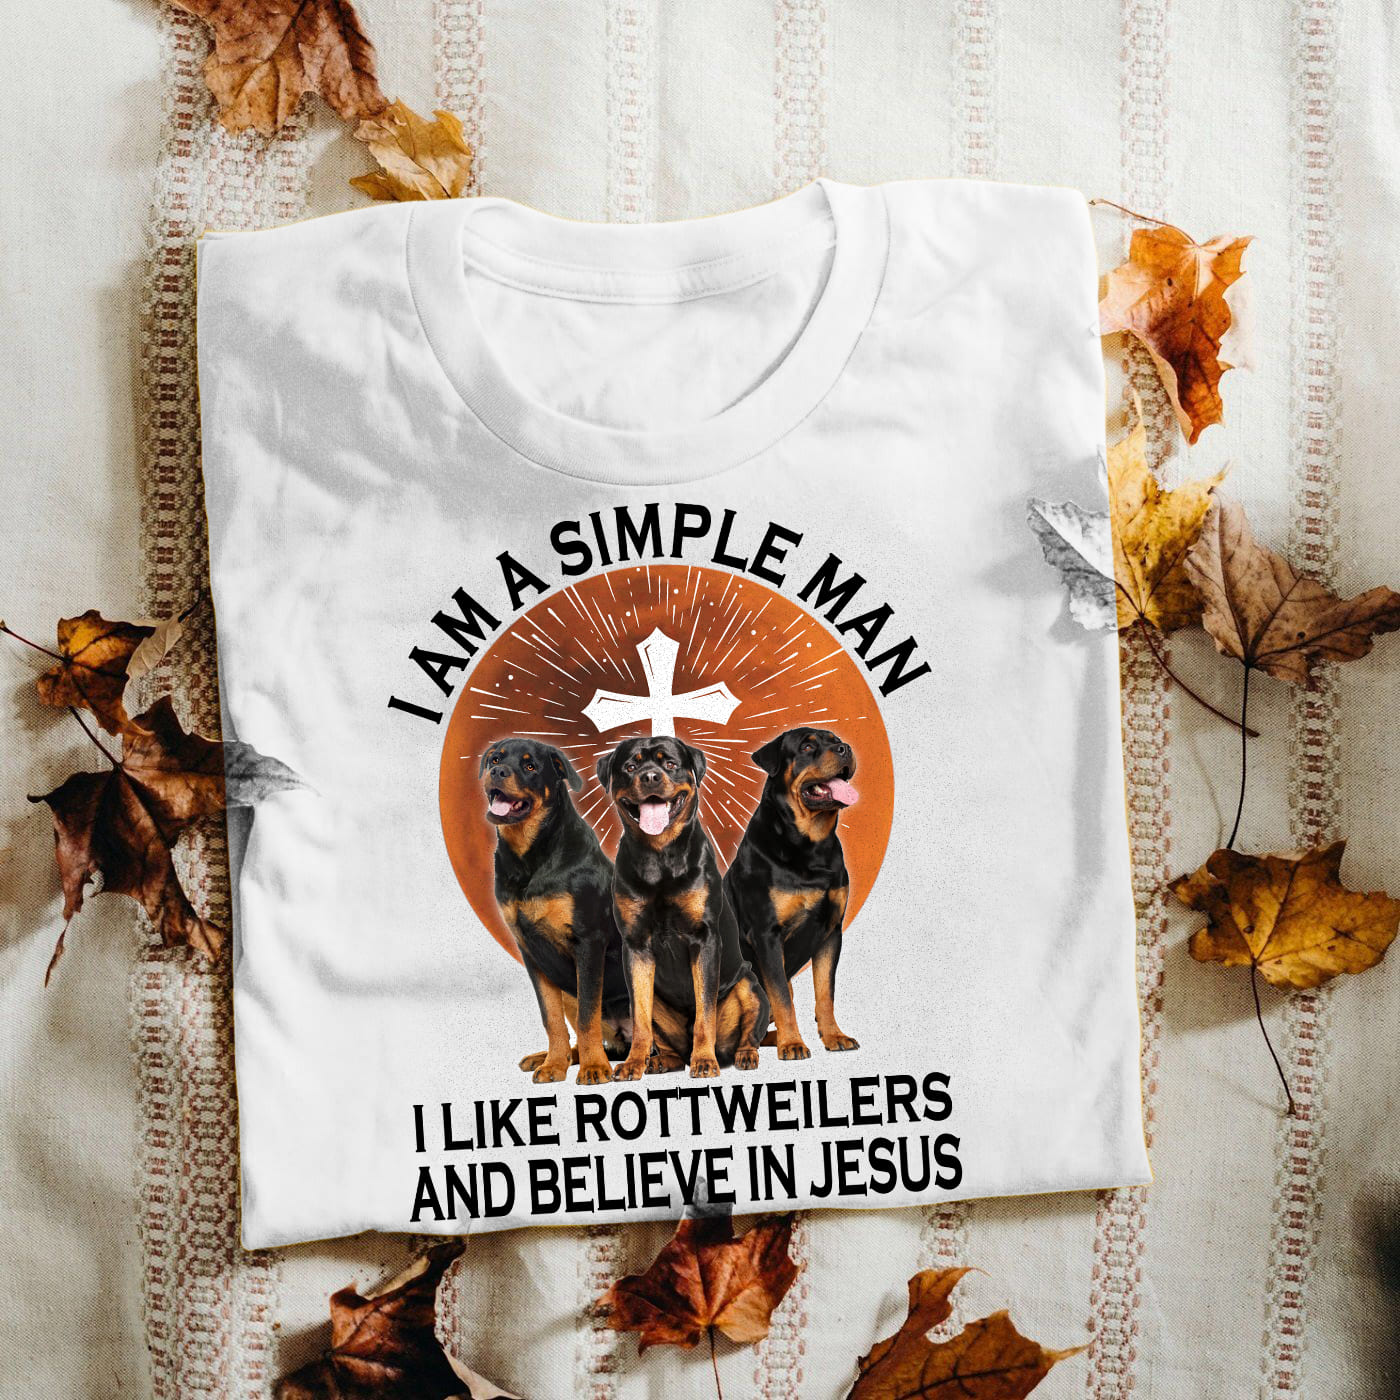 Rottweiler – I’m a simple man, I like Rottweilers and believe in Jesus Rottweiler T Shirt